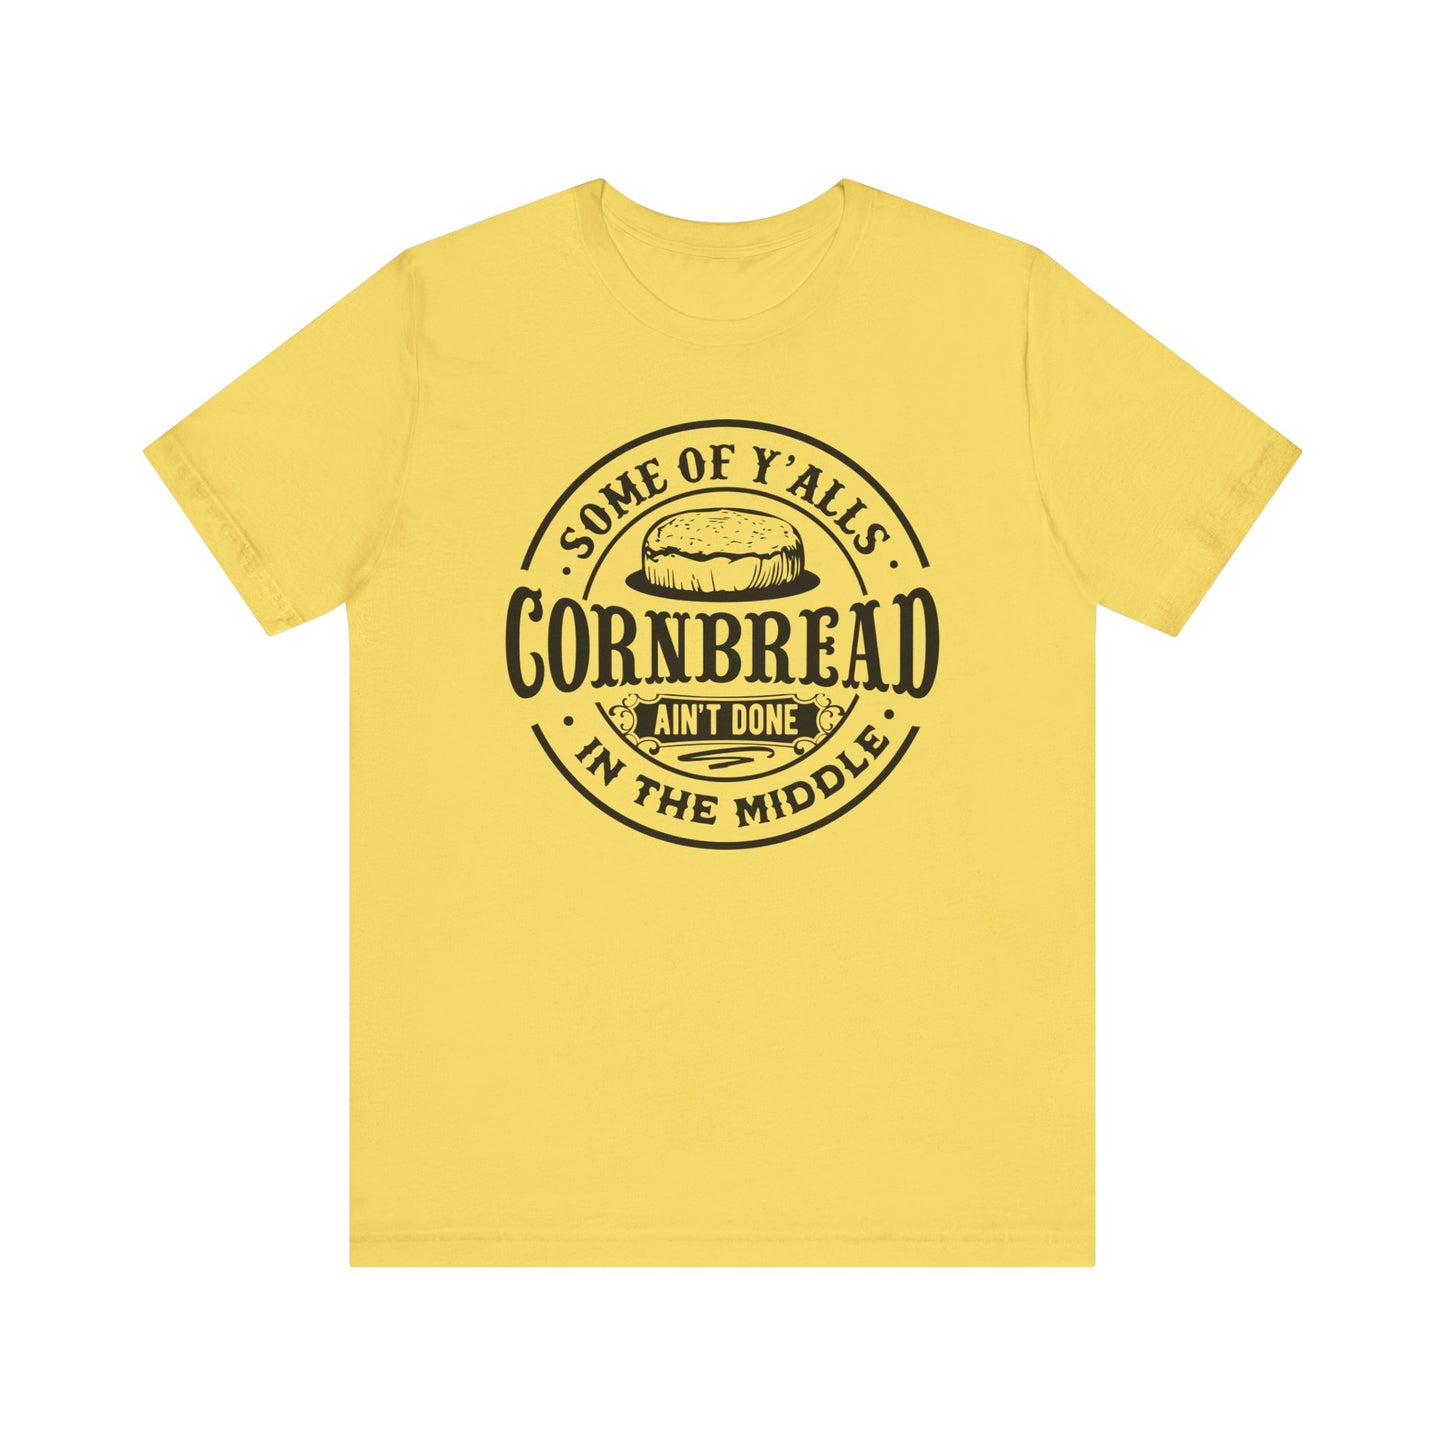 Funny Cornbread T-Shirt For Southern Humor TShirt For Sarcastic Comment T Shirt For Dummies